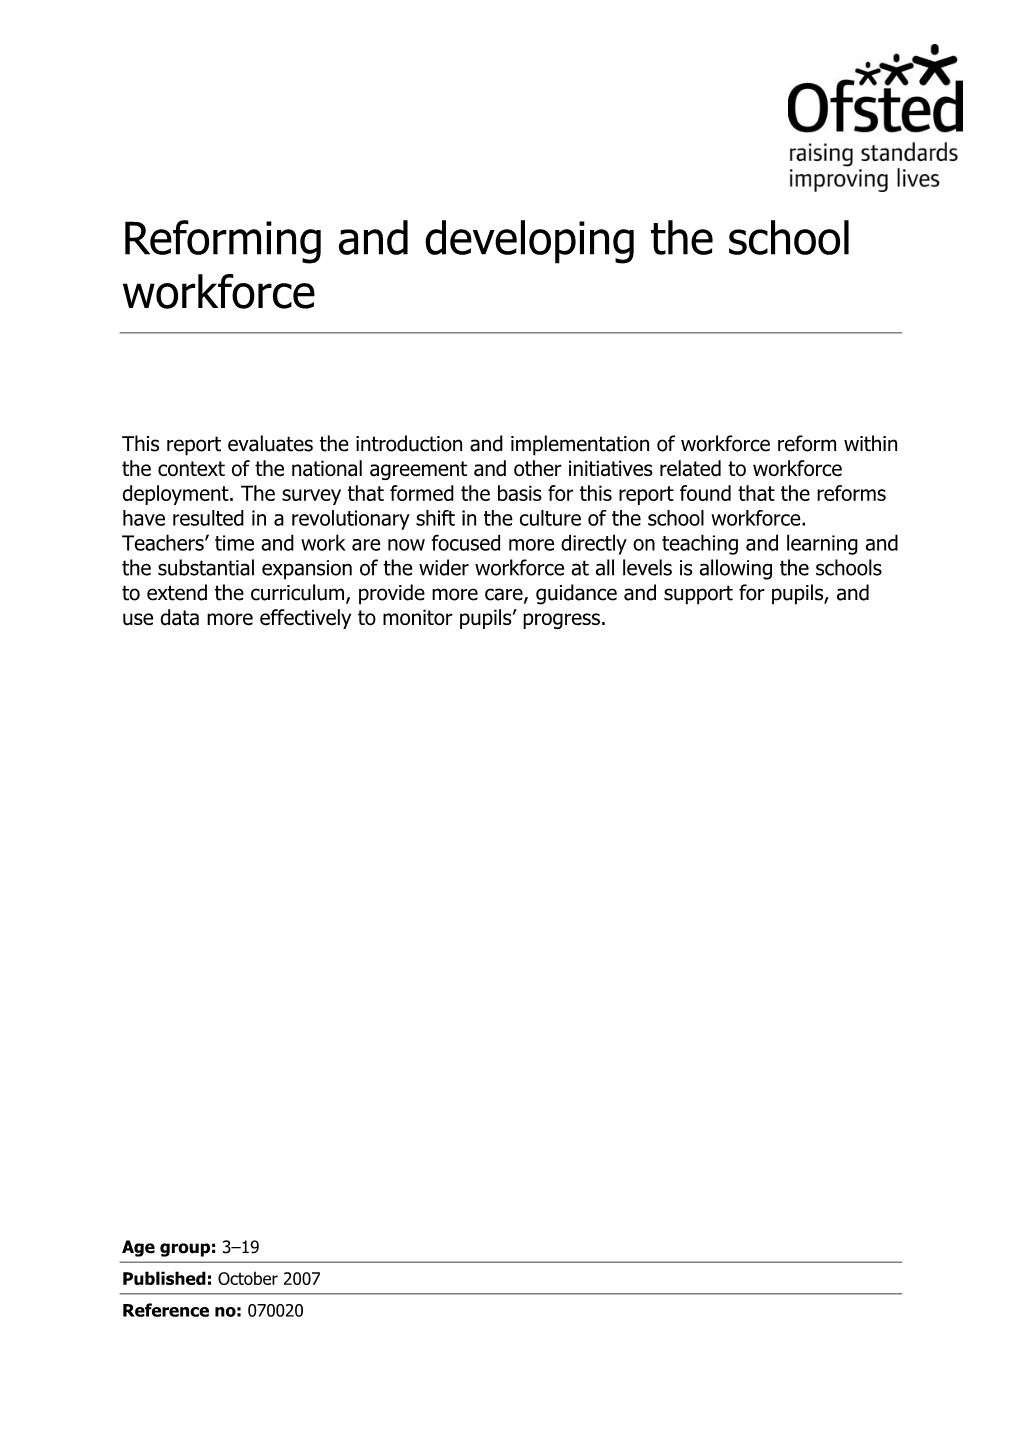 Reforming and Developing the School Workforce